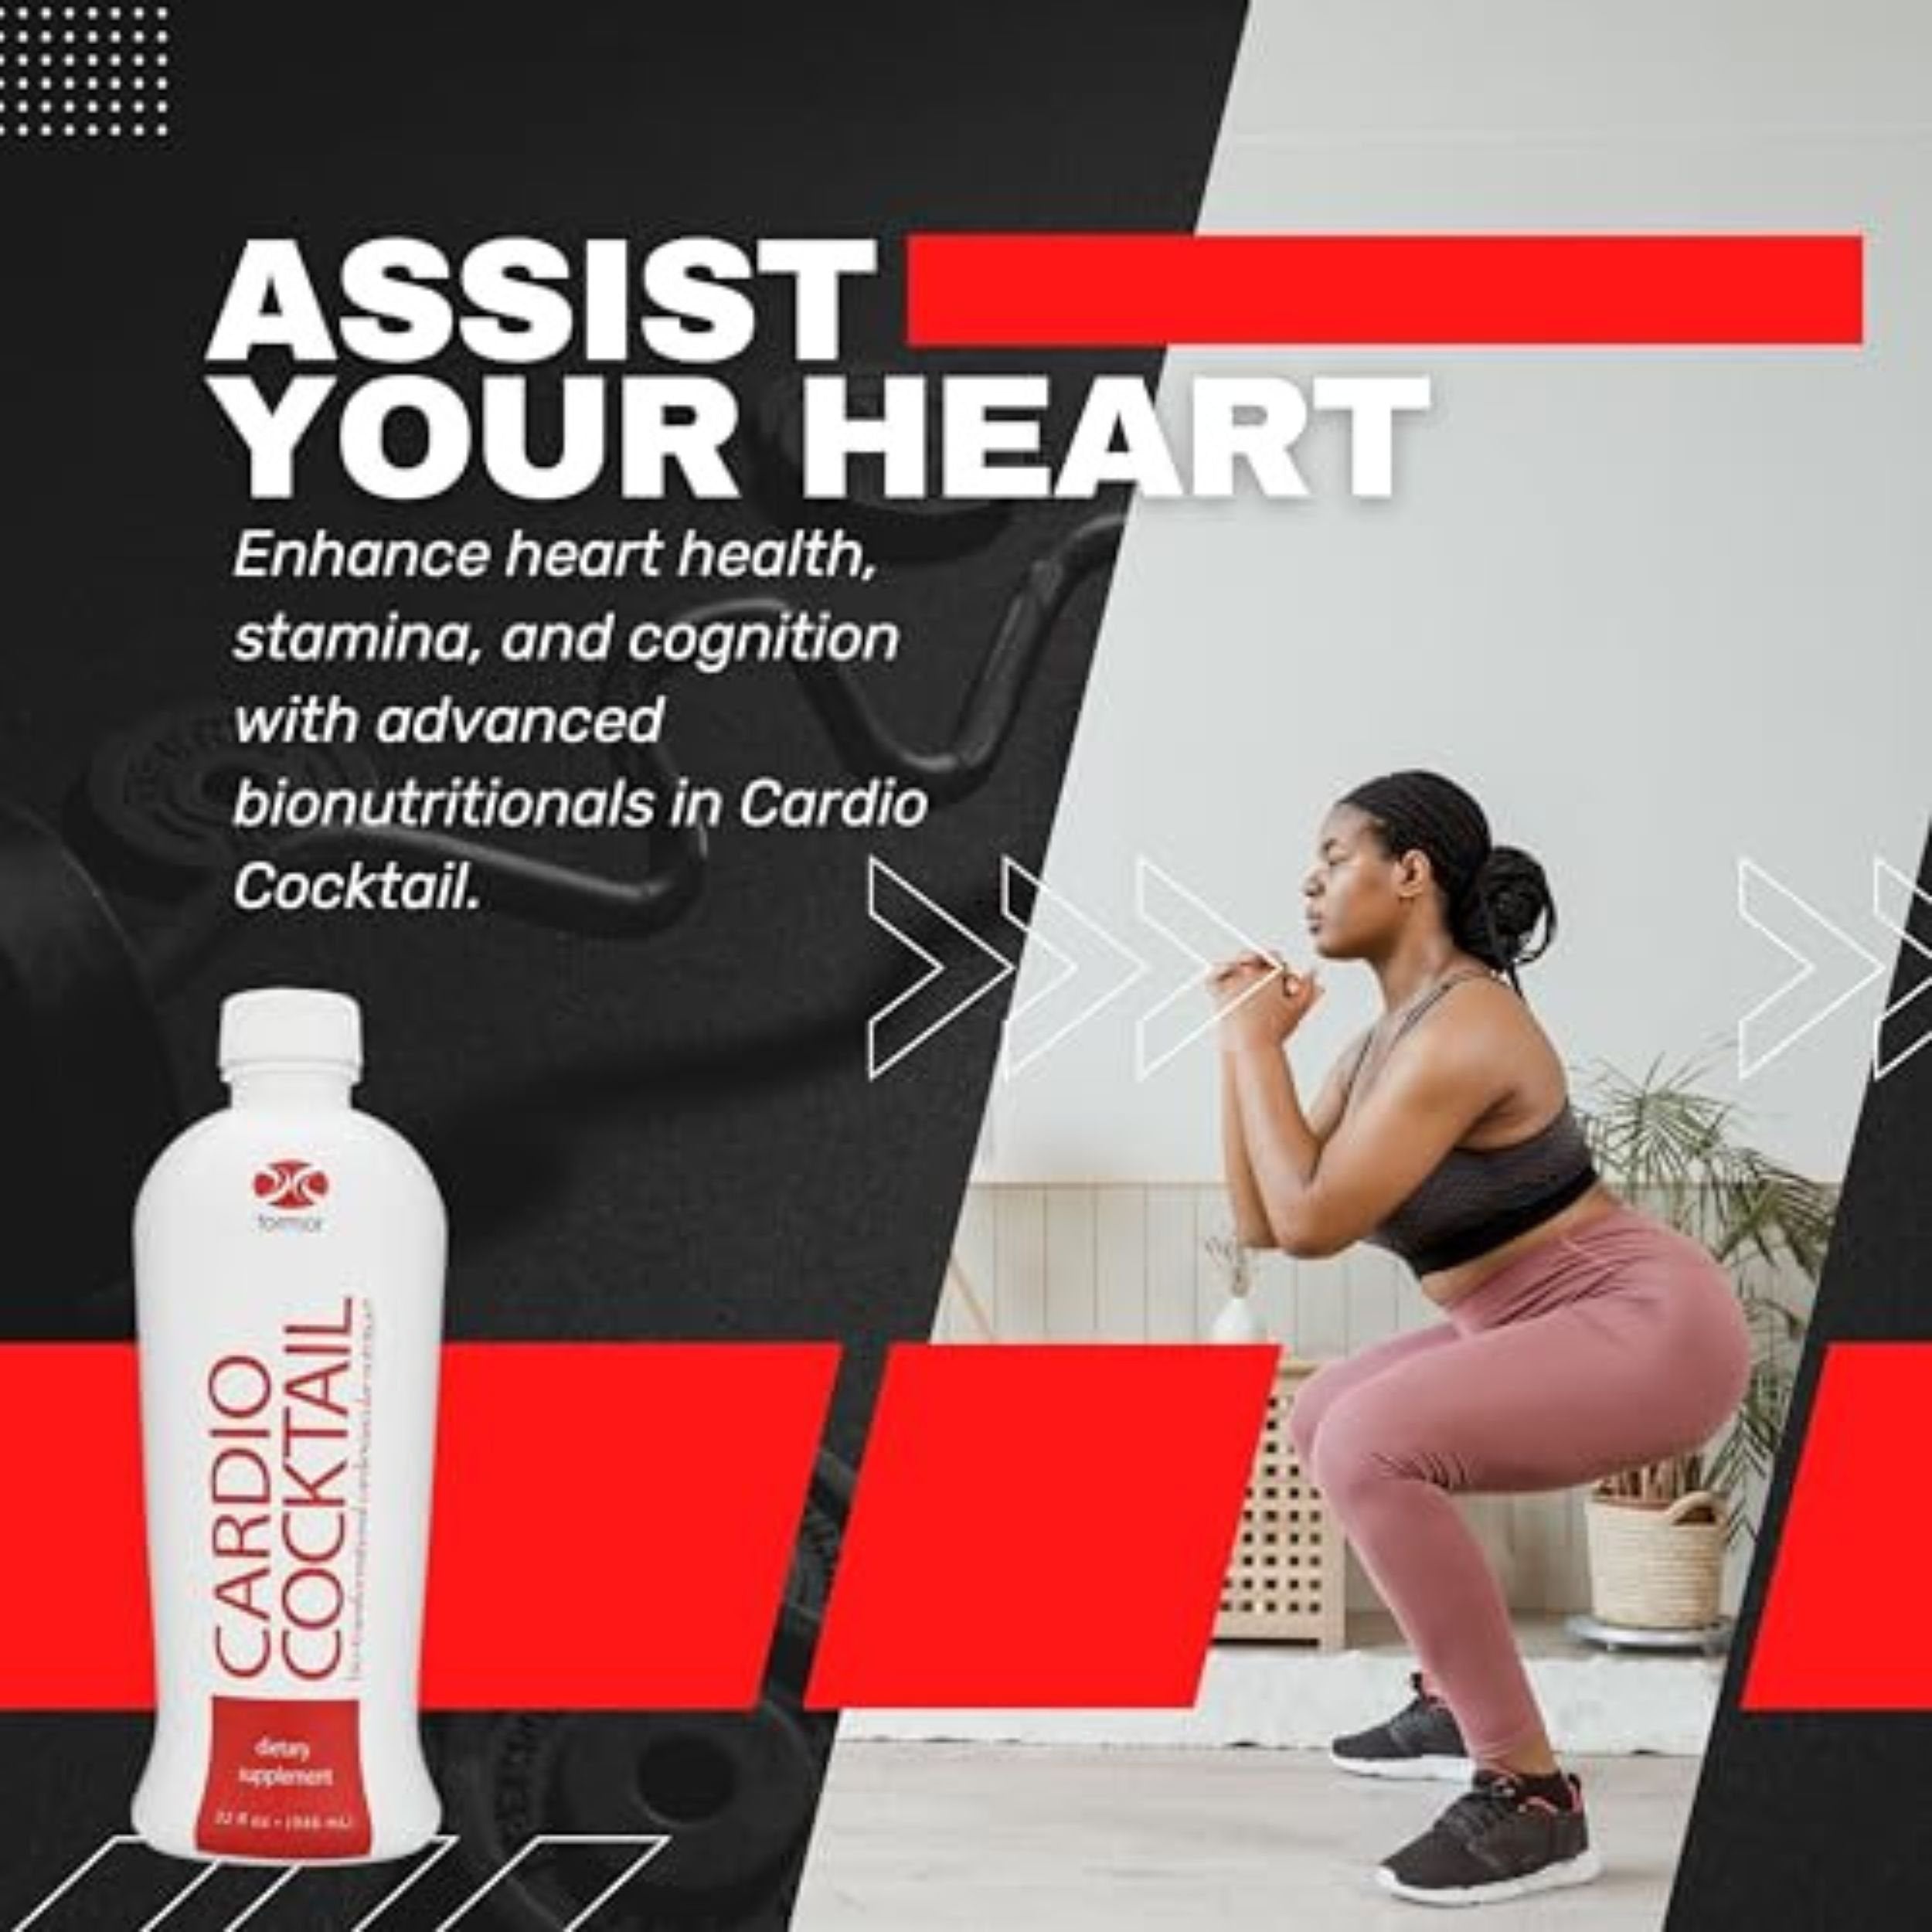 Worldwide Nutrition Bundle, 2 Items: Formor Cardio Cocktail Nitric Oxide Booster with L Arginine L Citrulline Supplement - 2 Count, 32 Oz Blood Pressure Supplements and Multi-Purpose Key Chain